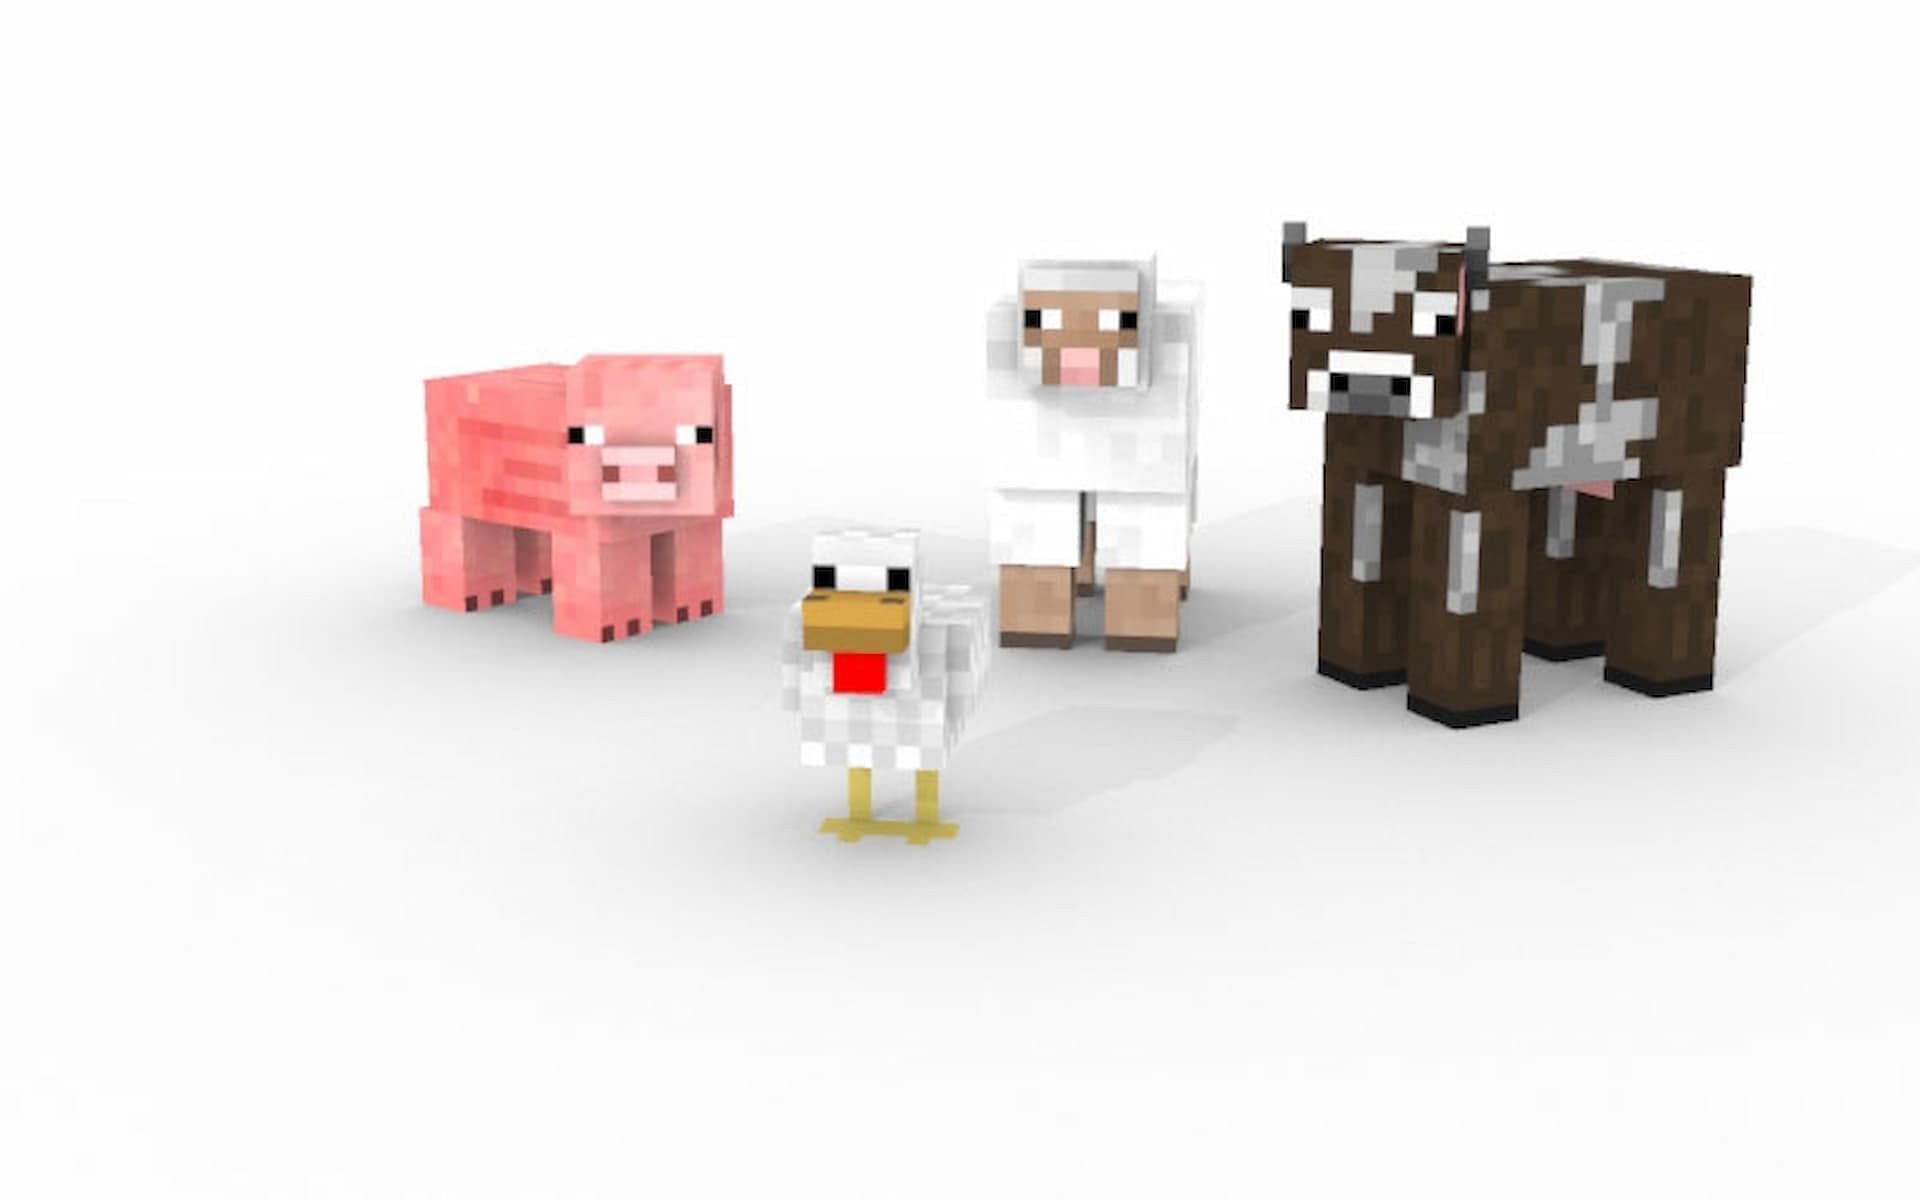 There are many different passive mobs in Minecraft (Image via Minecraft.net)